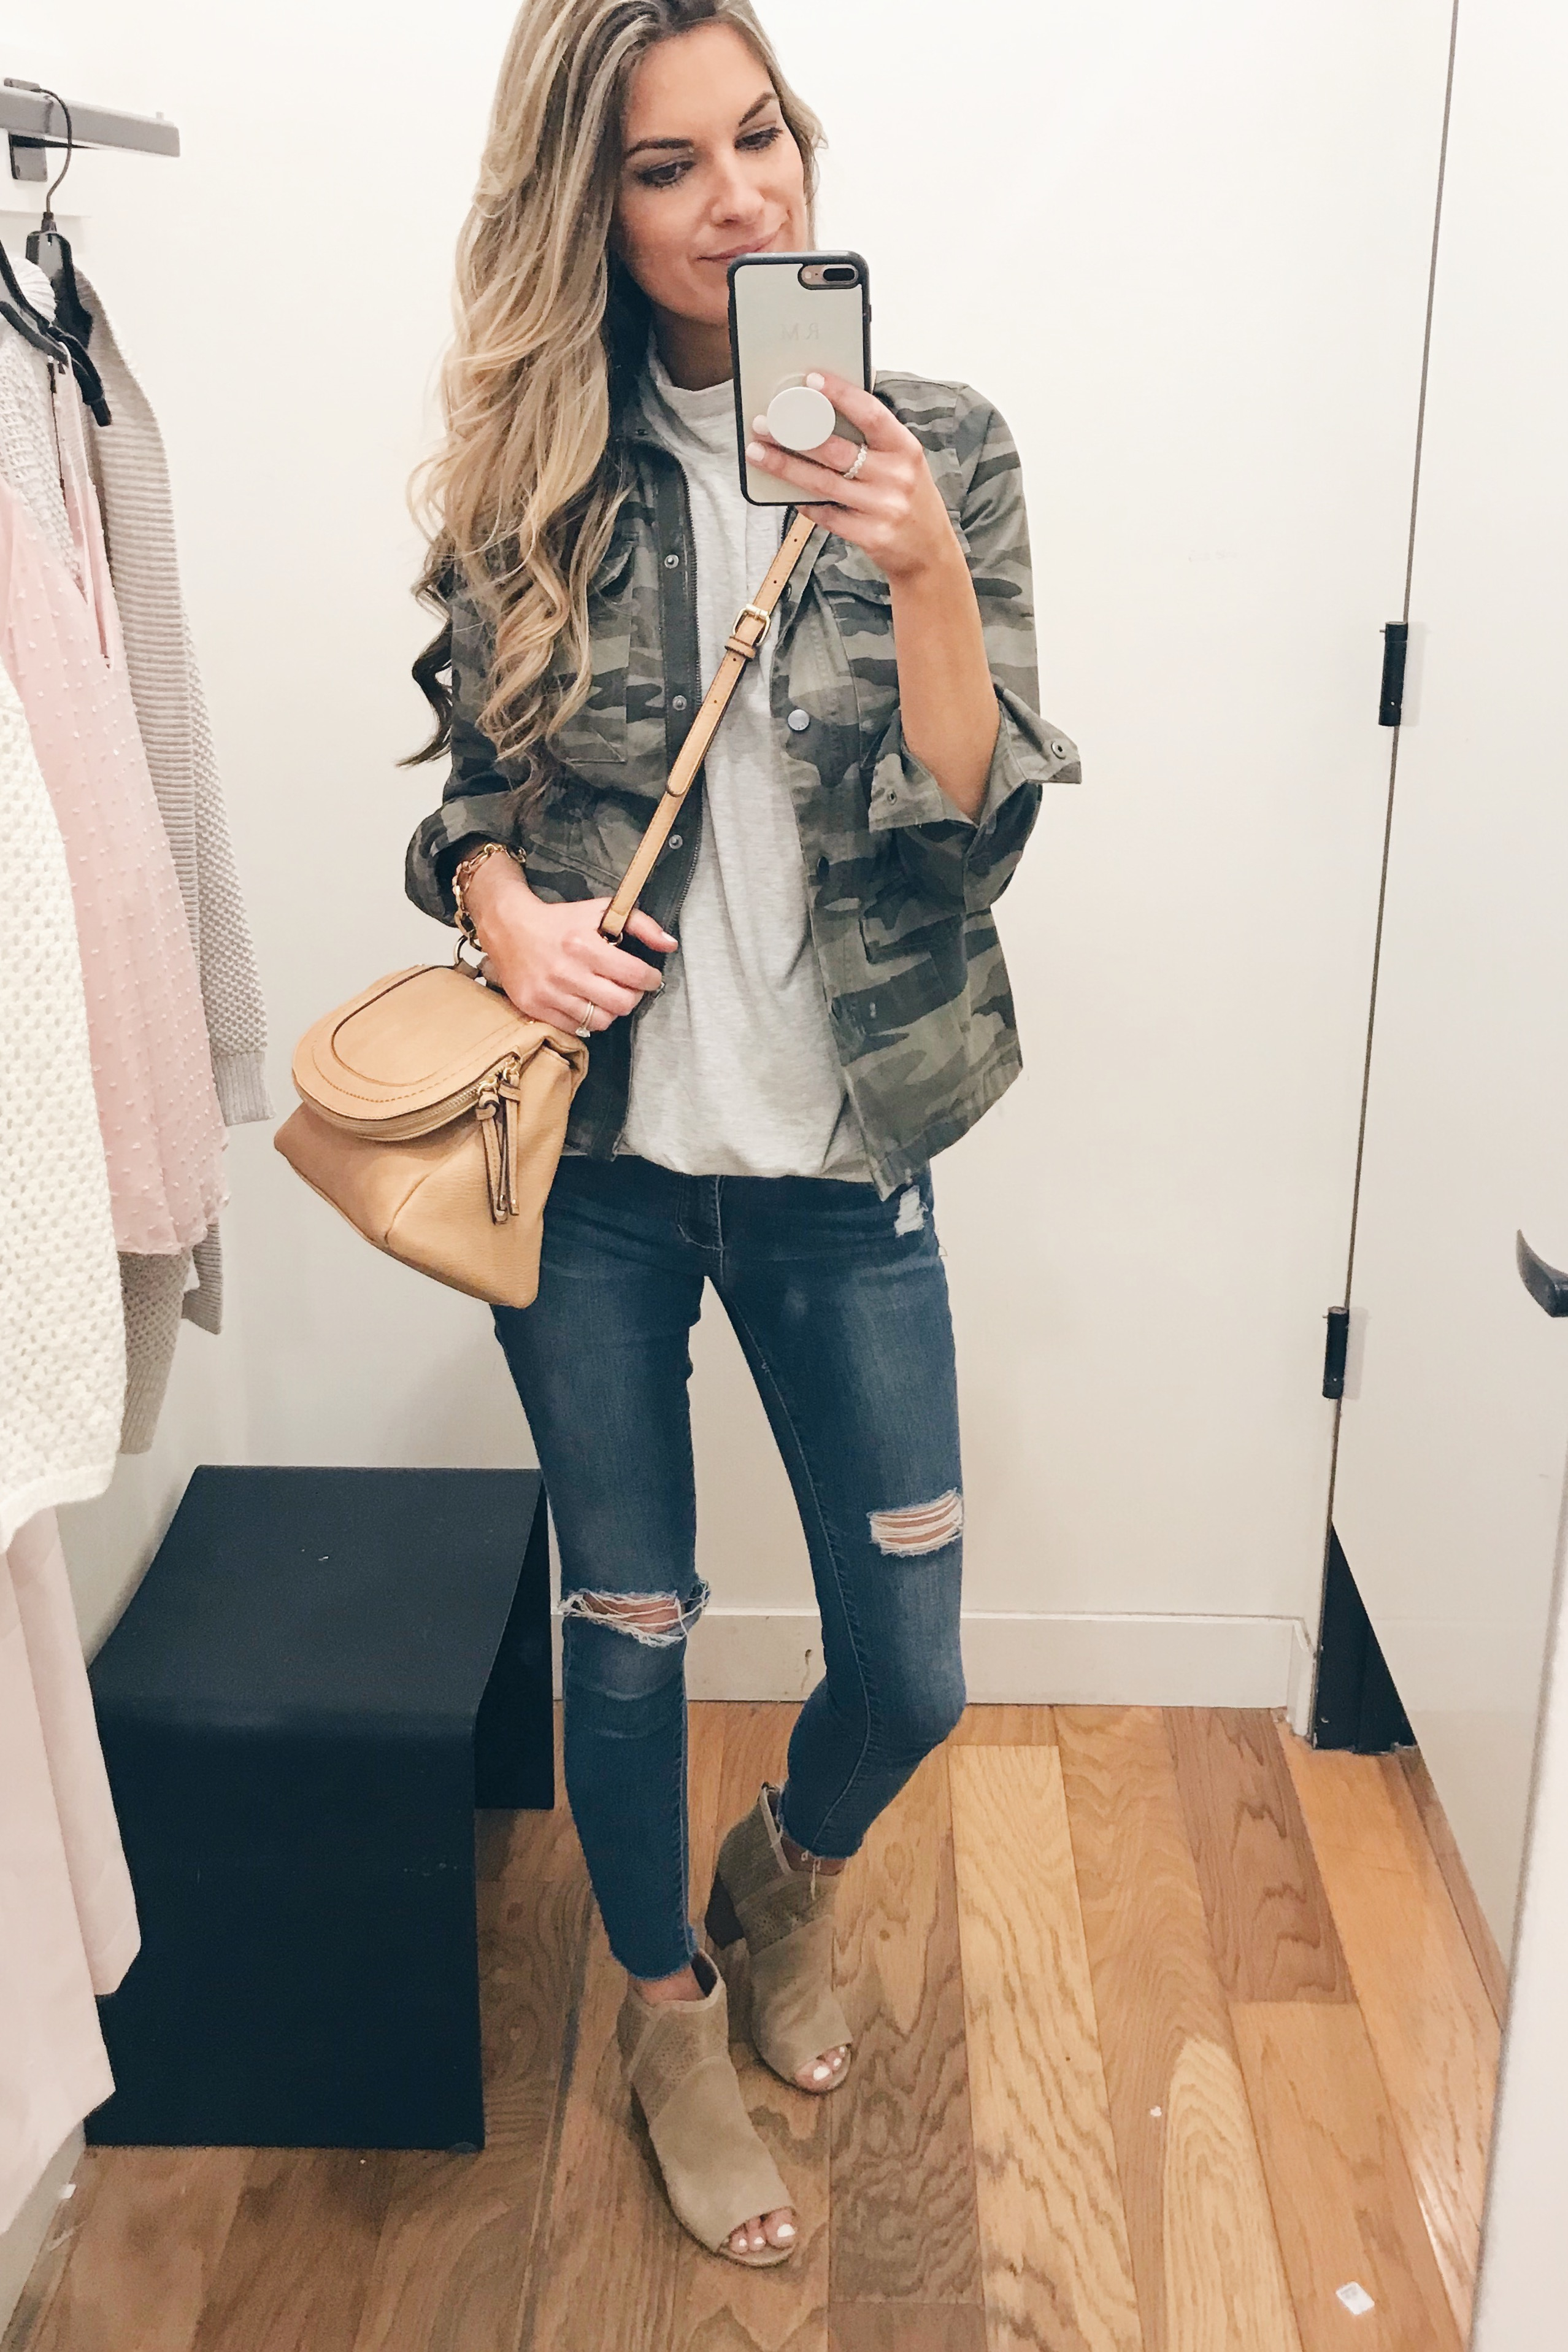 Pinteresting Plans blog - spring outfit with camo jacket and peep toe booties 